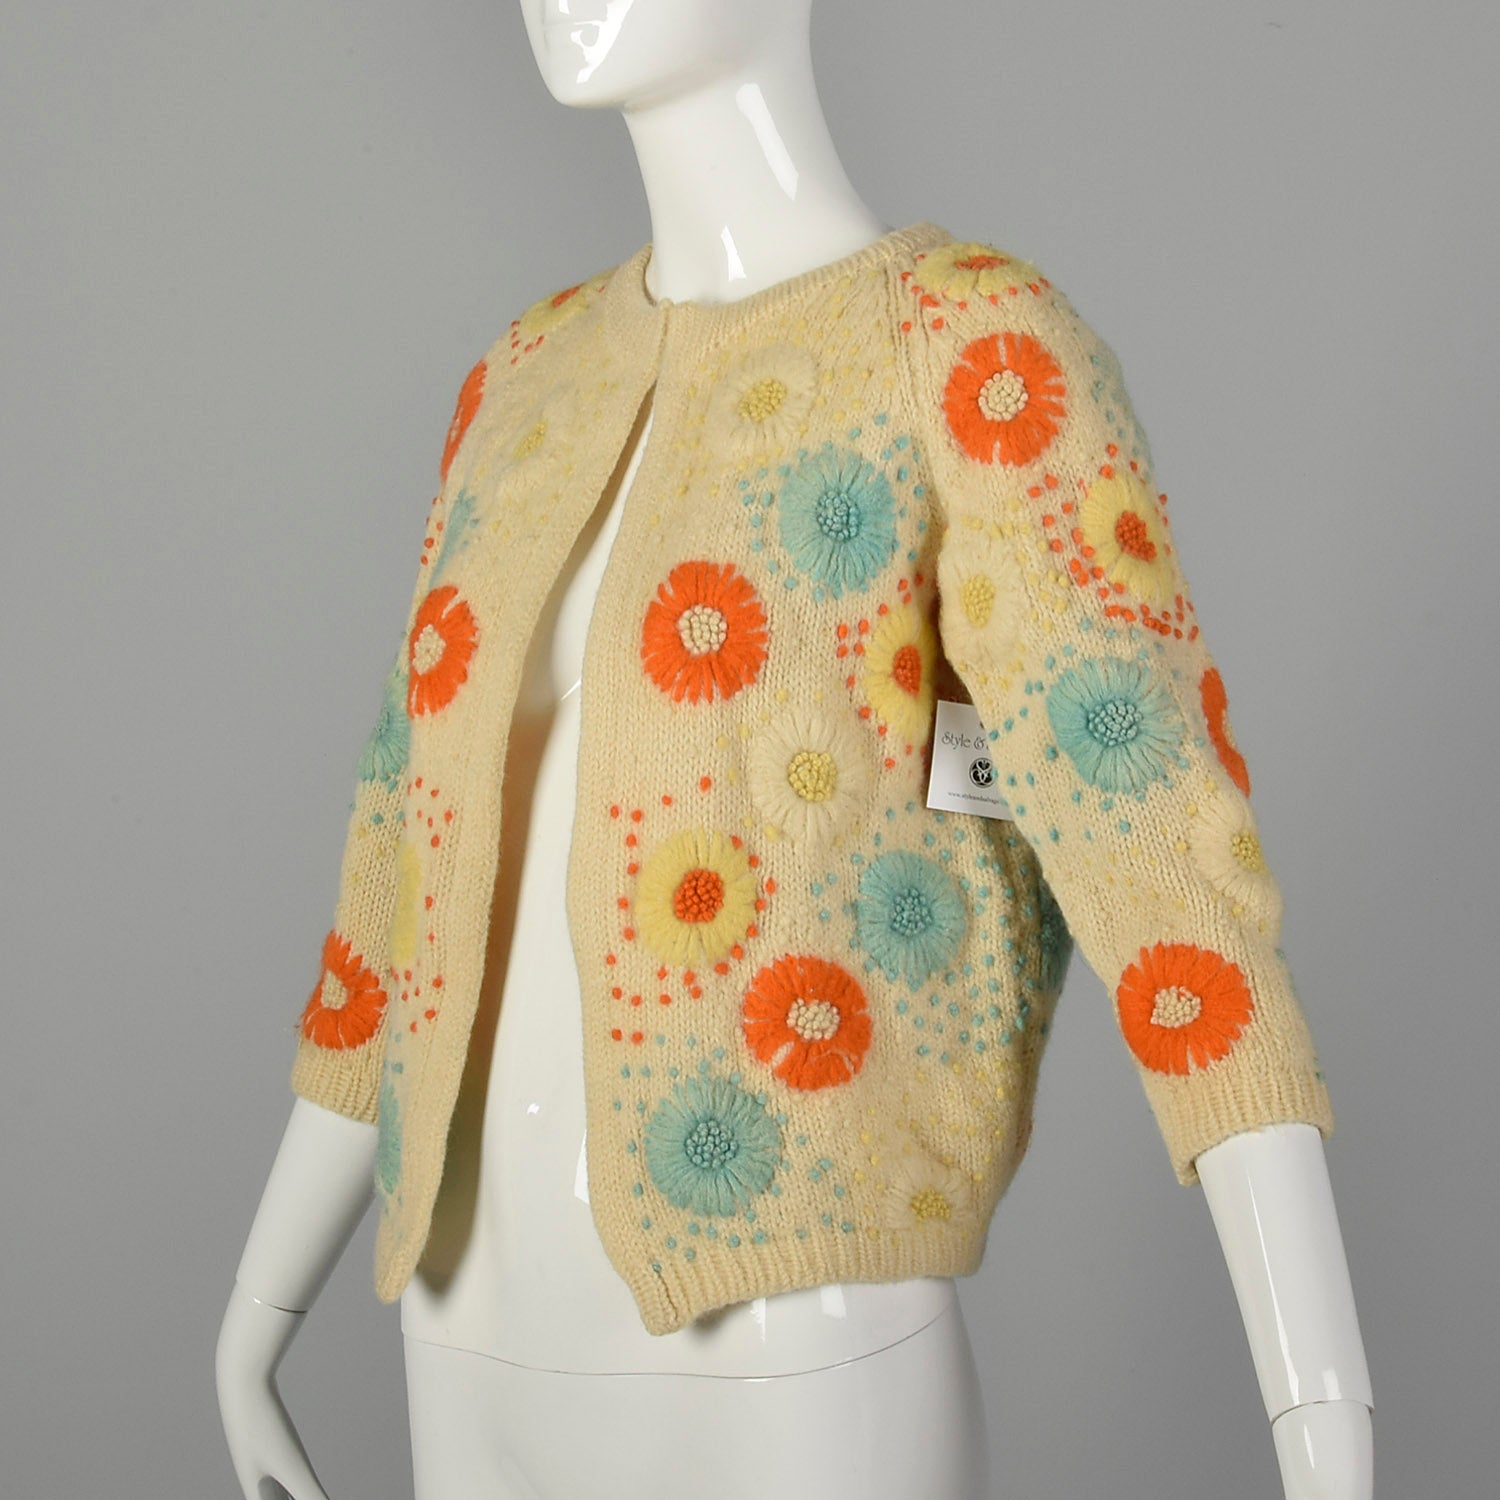 Small 1960s Boho Cardigan Cream Sweater with Multi-Color Floral Embroidery